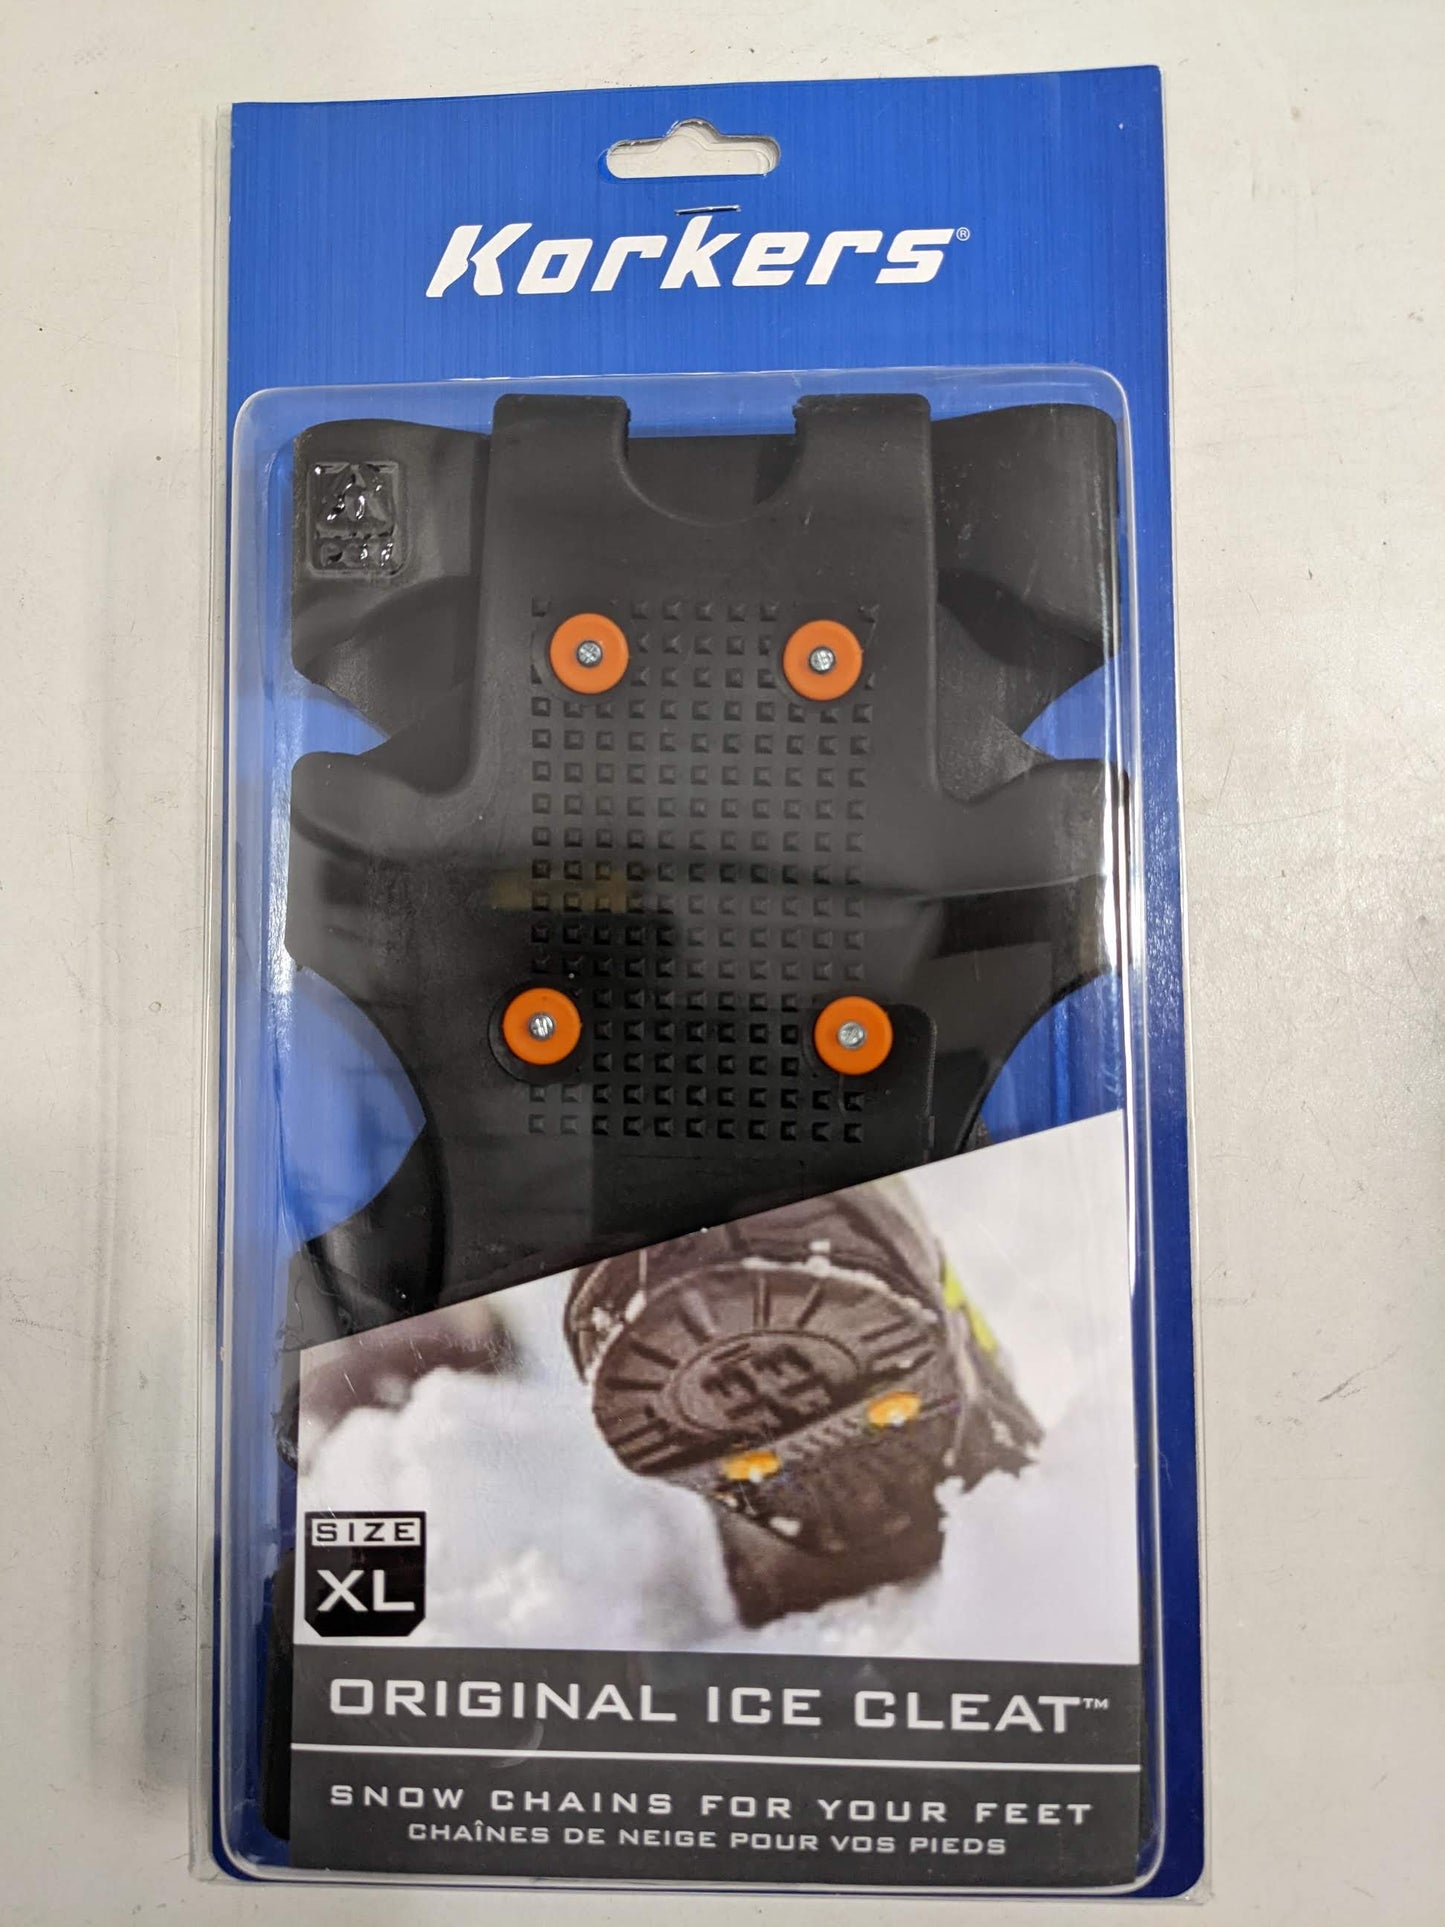 Korkers Original Ice Cleats Medium,  Large and XL, Gray New